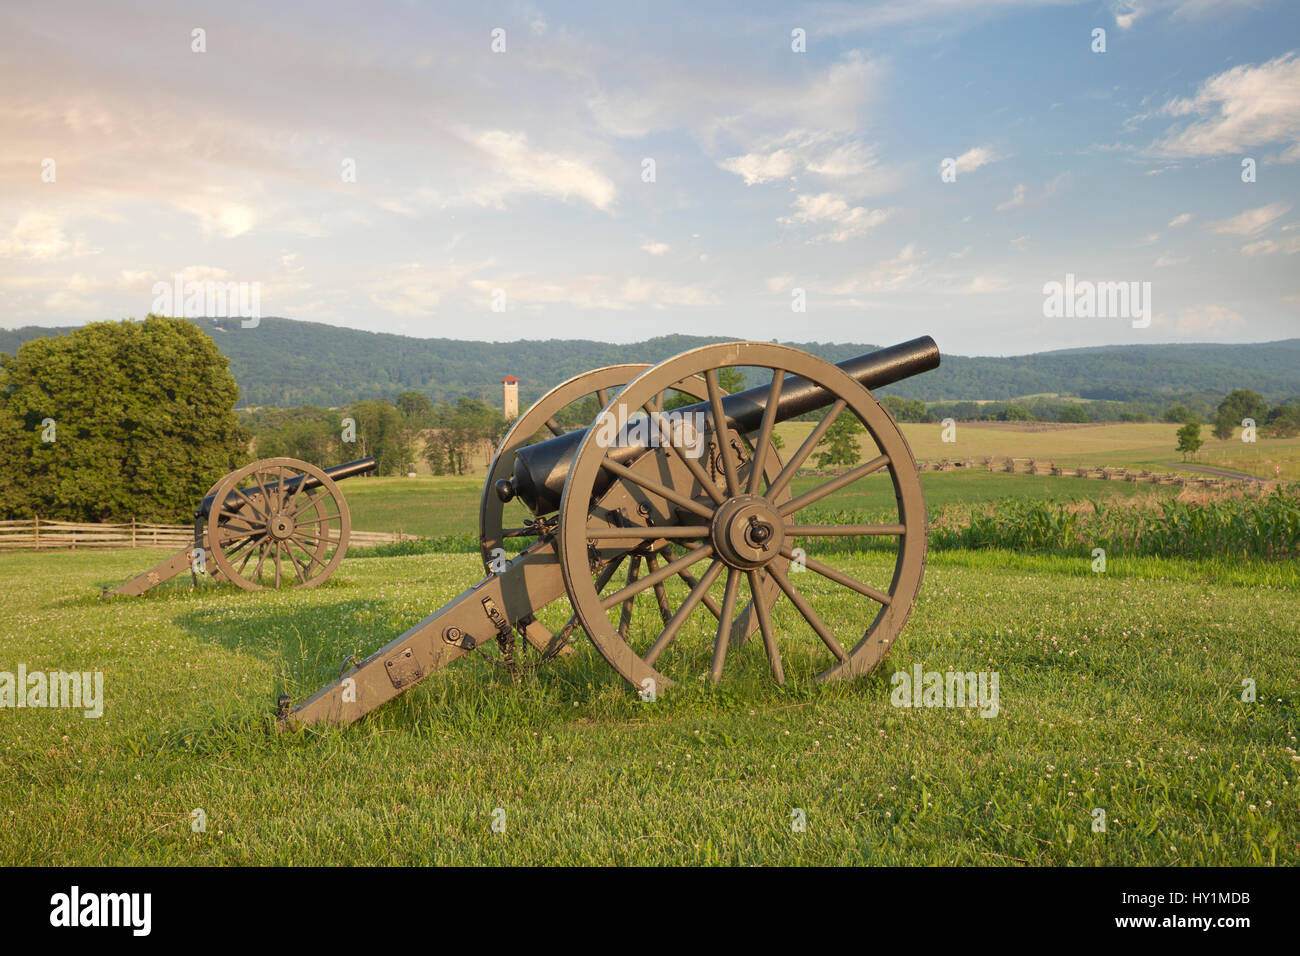 Cannon at Antietam (Sharpsburg) Battlefield in Maryland with the fence of Bloody Lane, also known as the Sunken Road in the middleground on the right. Stock Photo